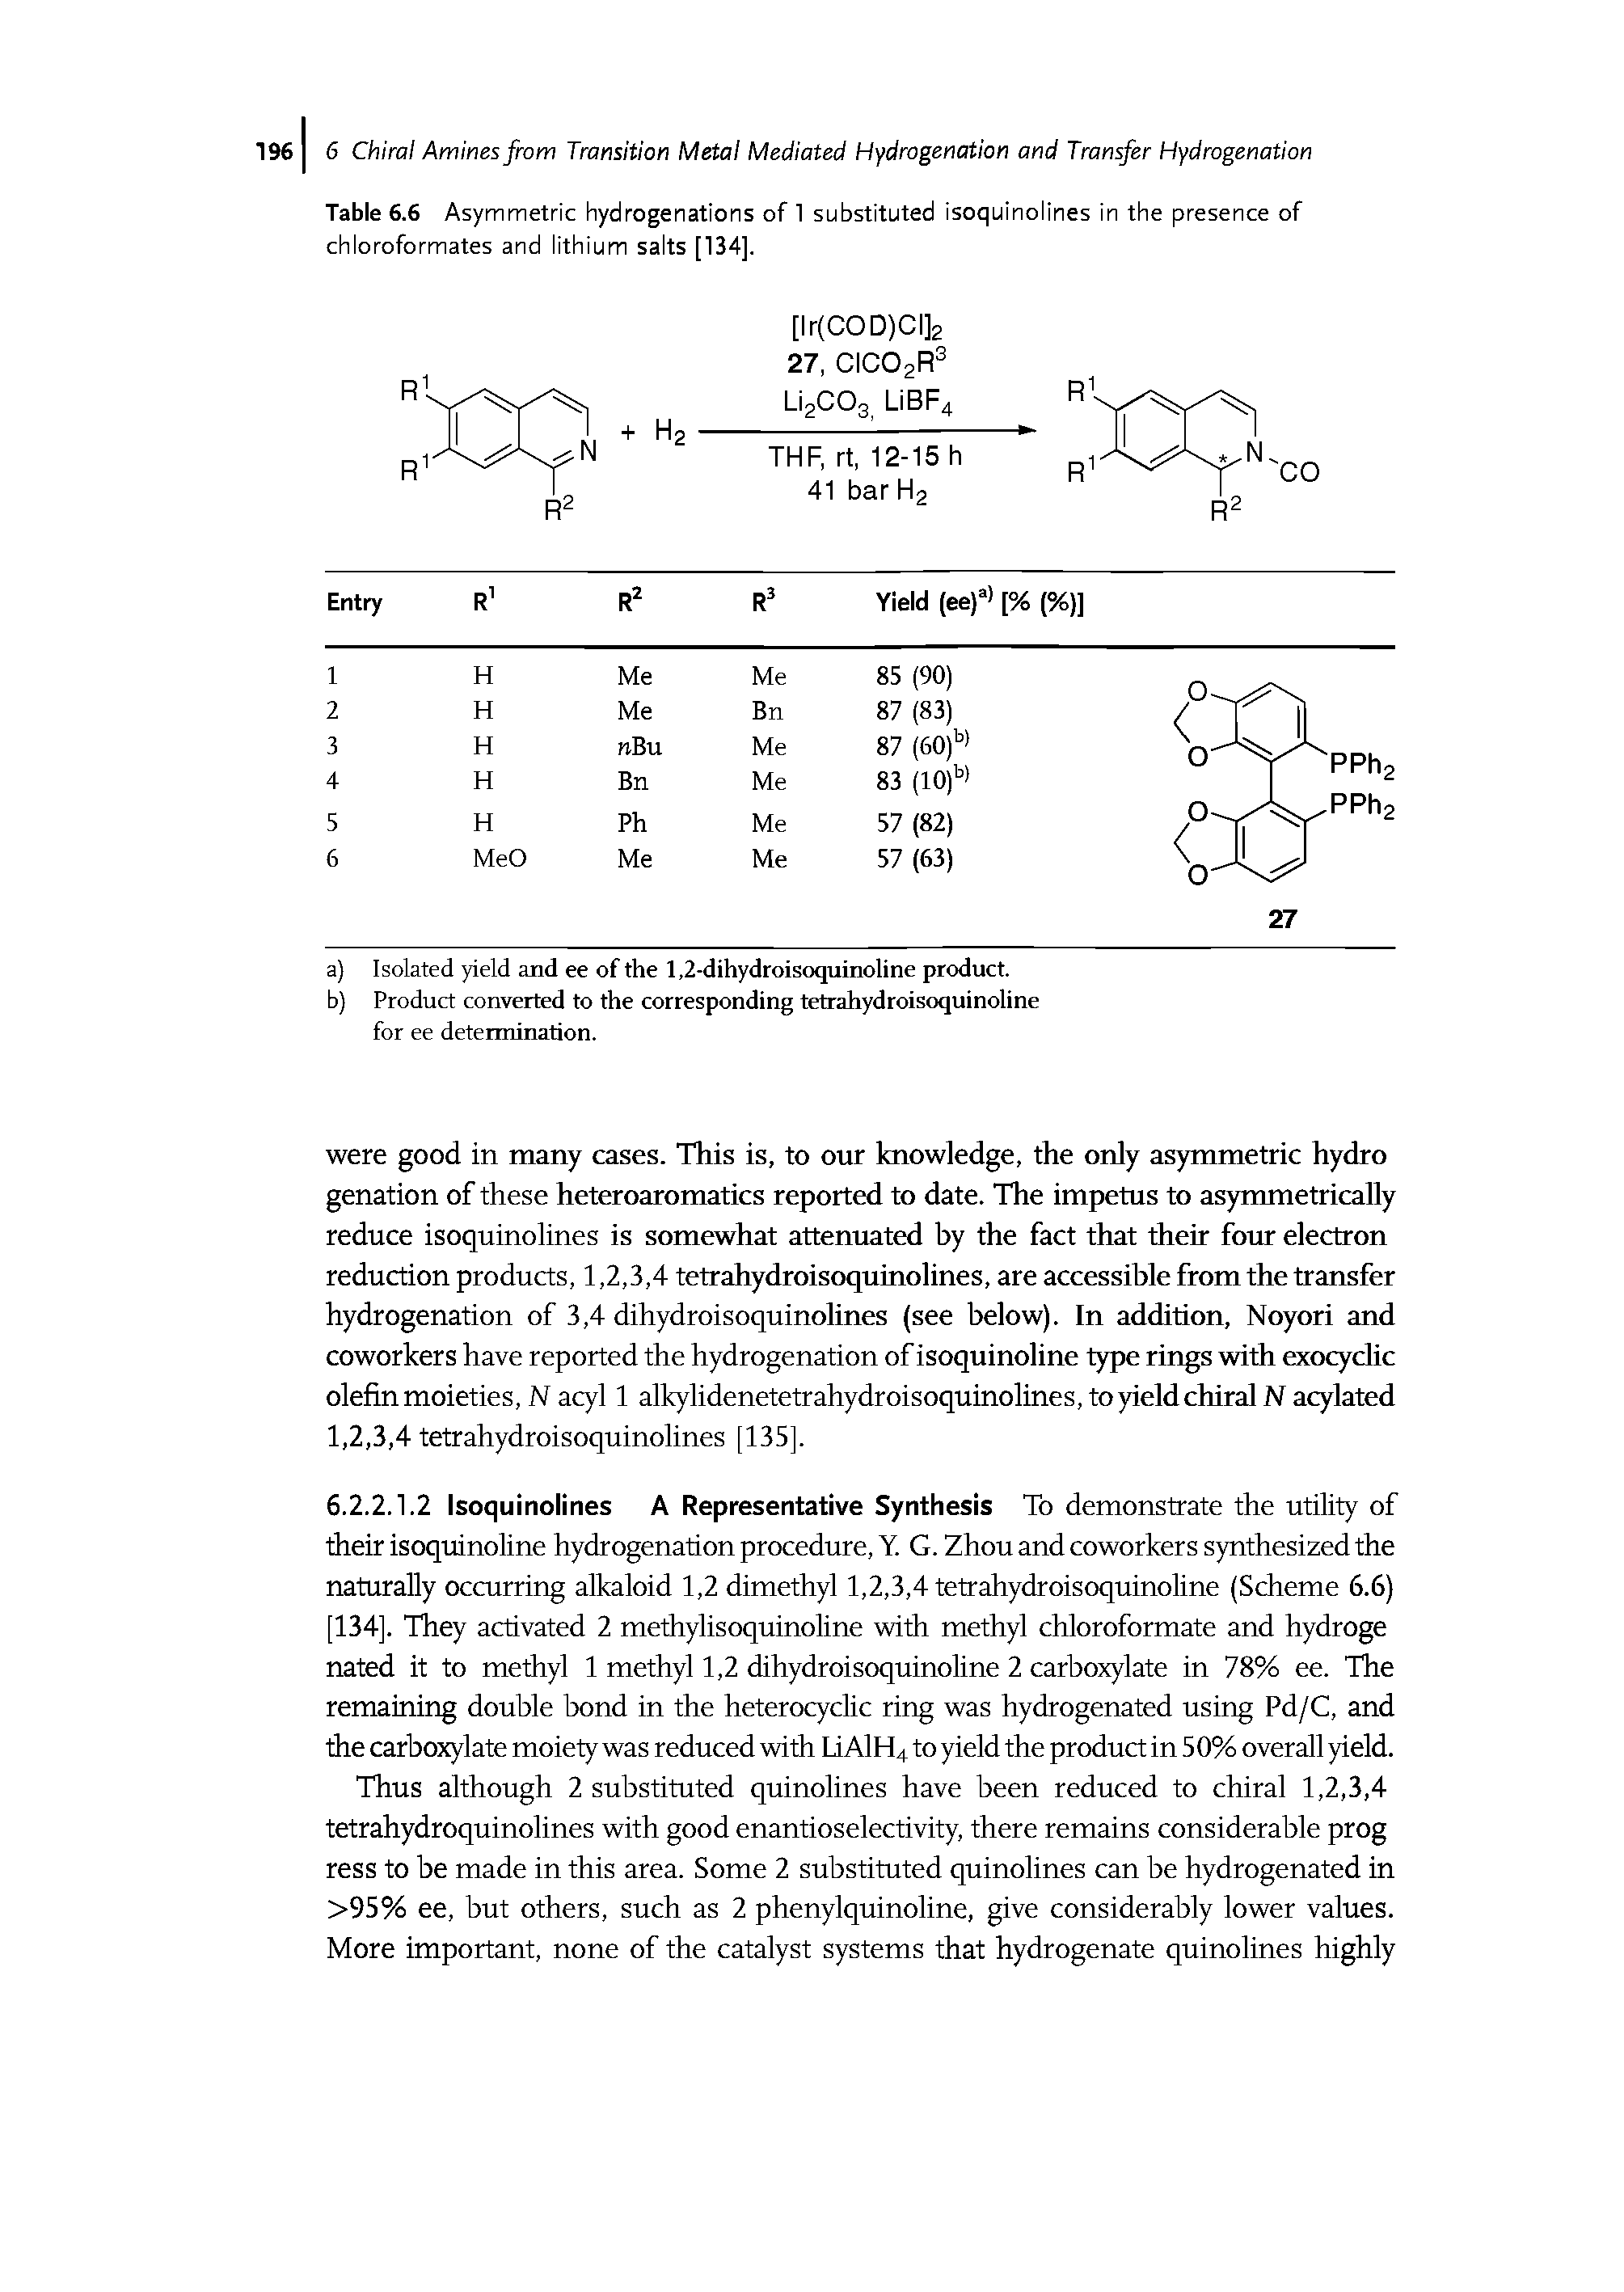 Table 6.6 Asymmetric hydrogenations of 1 substituted isoquinolines in the presence of chloroformates and lithium salts [134].